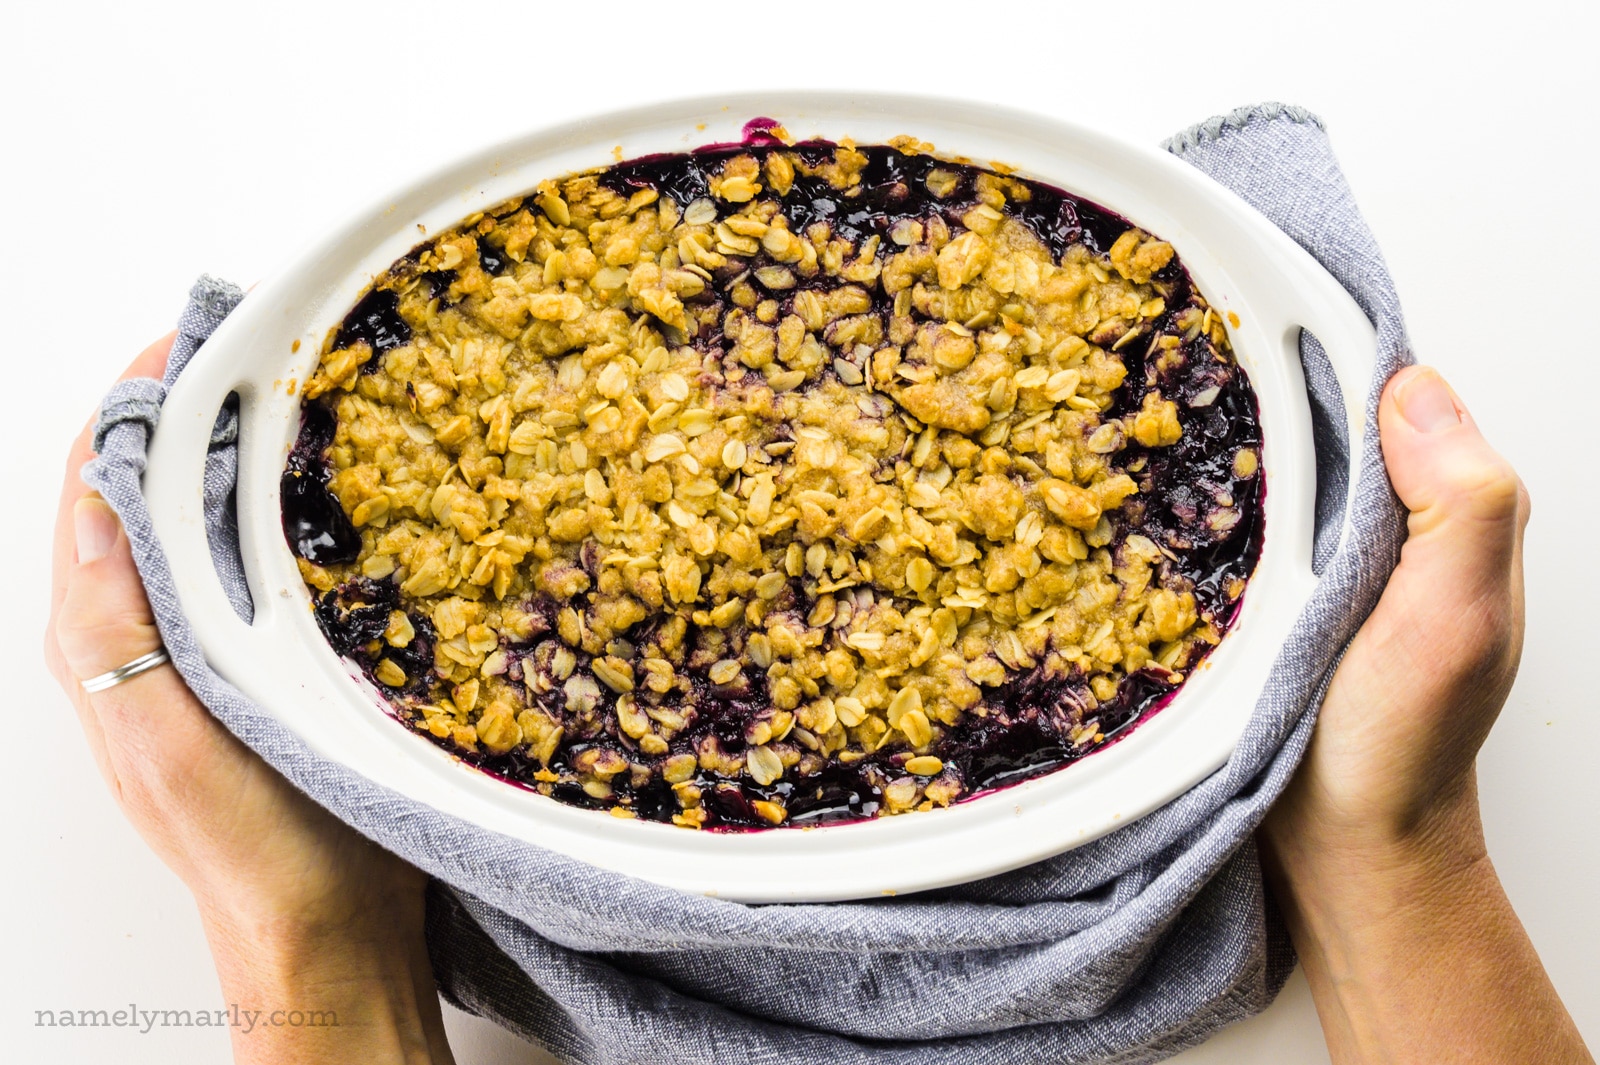 Hands hold a towel around a freshly baked batch of blueberry crumble.